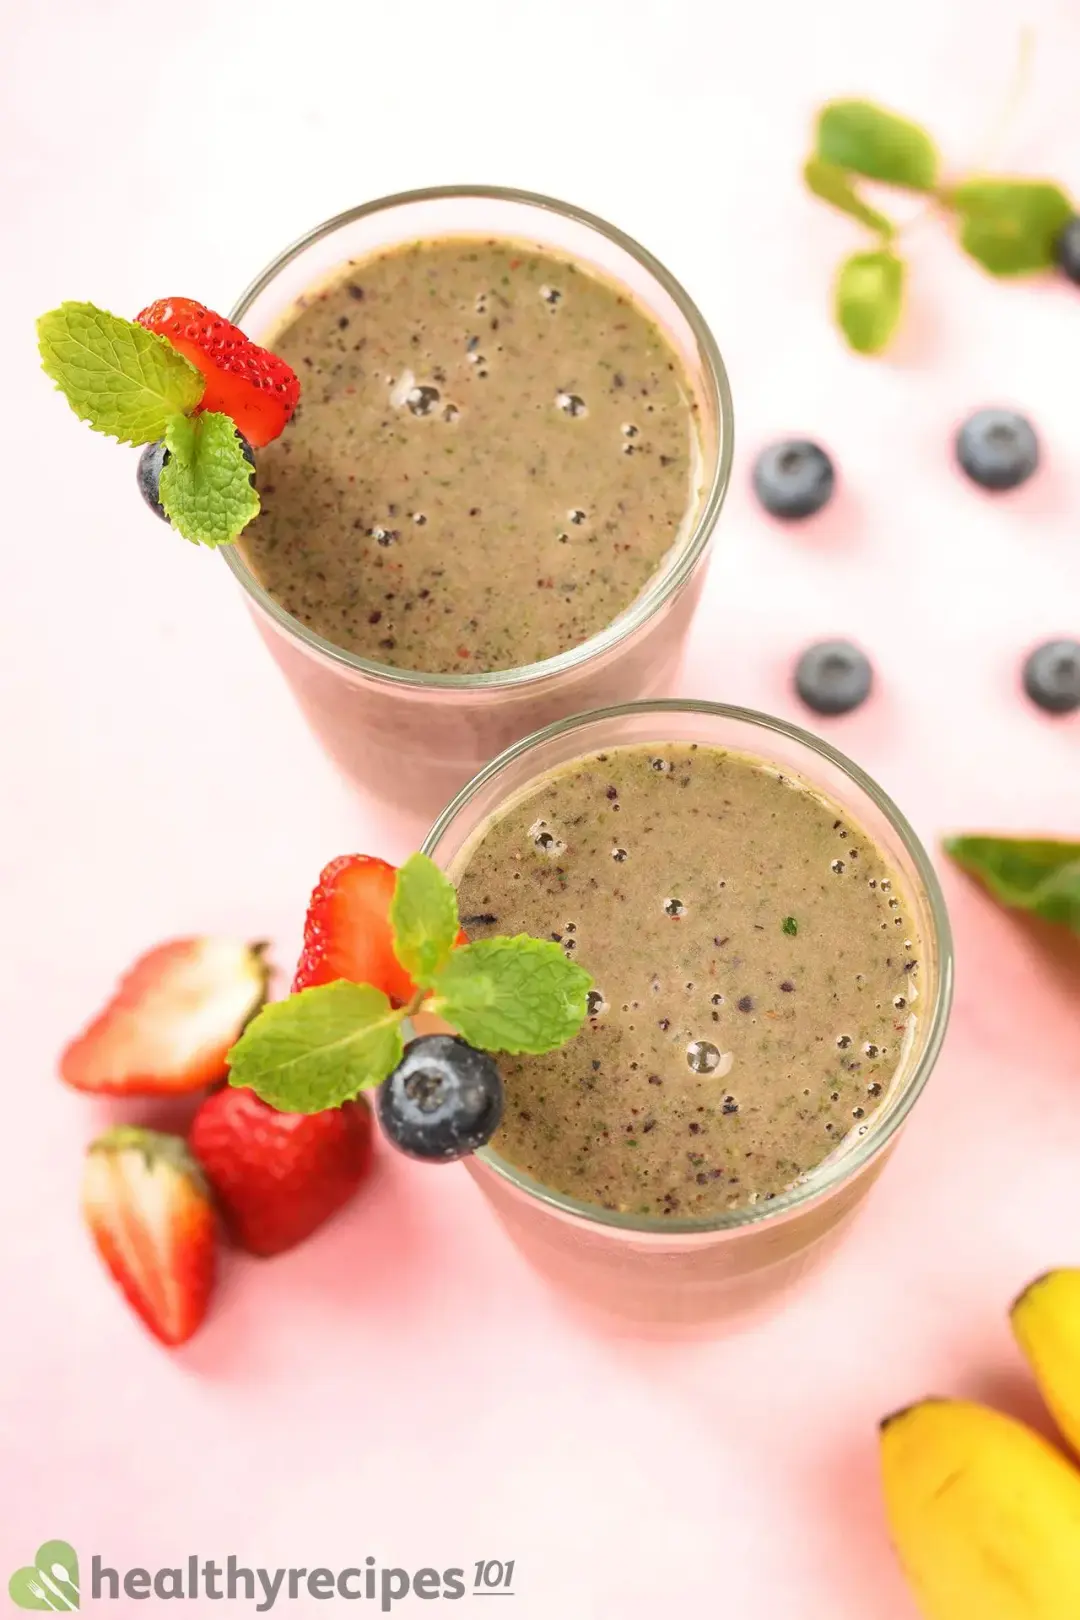 What Berries to Use in Smoothies